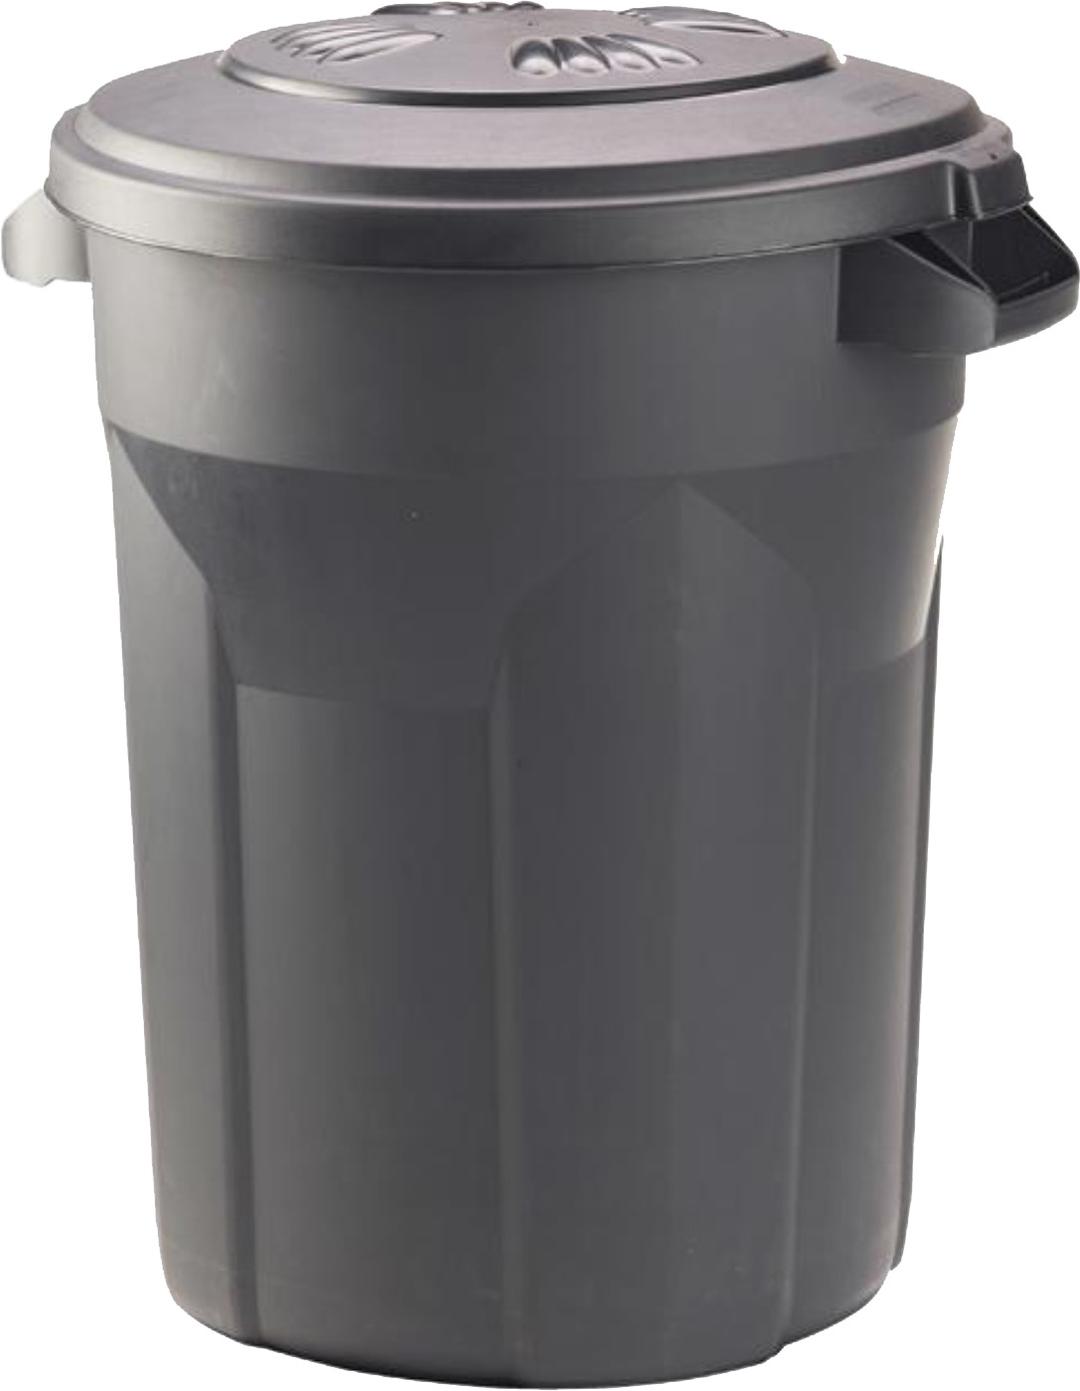 Libman Heavy-Duty 32 Gallon Trash Can with Lid - 1464 | Rural King